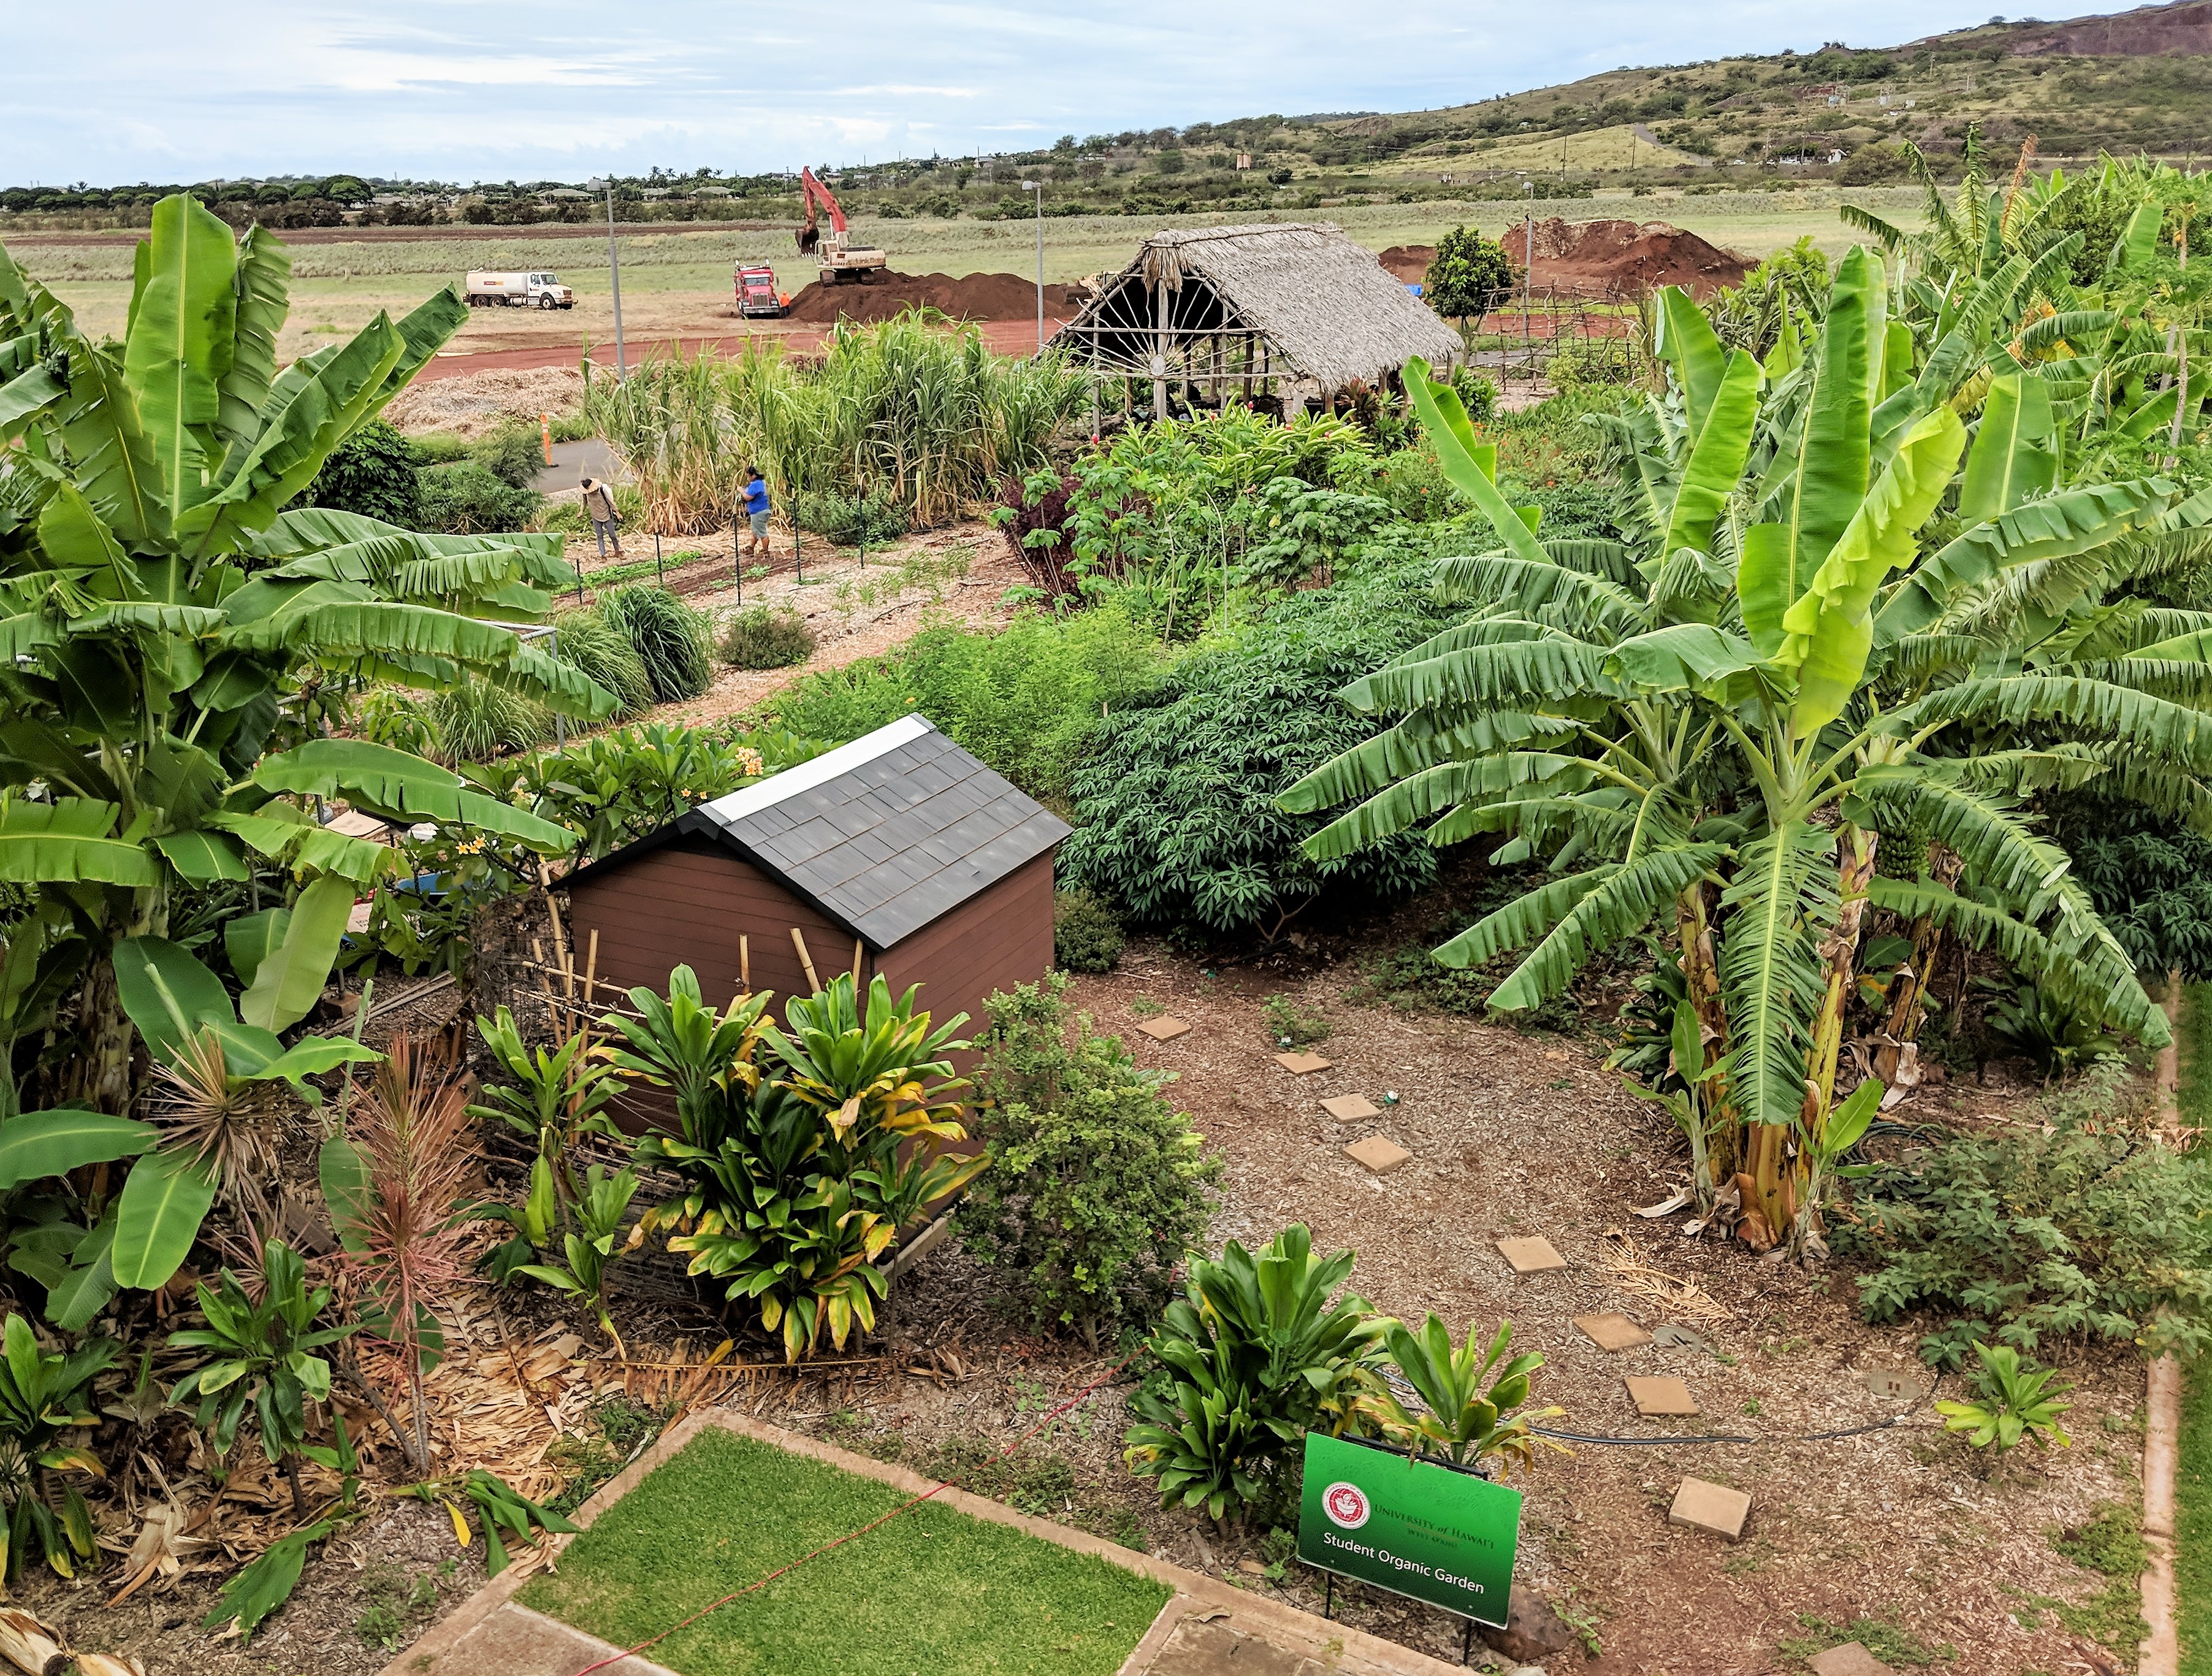 Photo looking down on a garden filled with banana plants, other growth and a hale